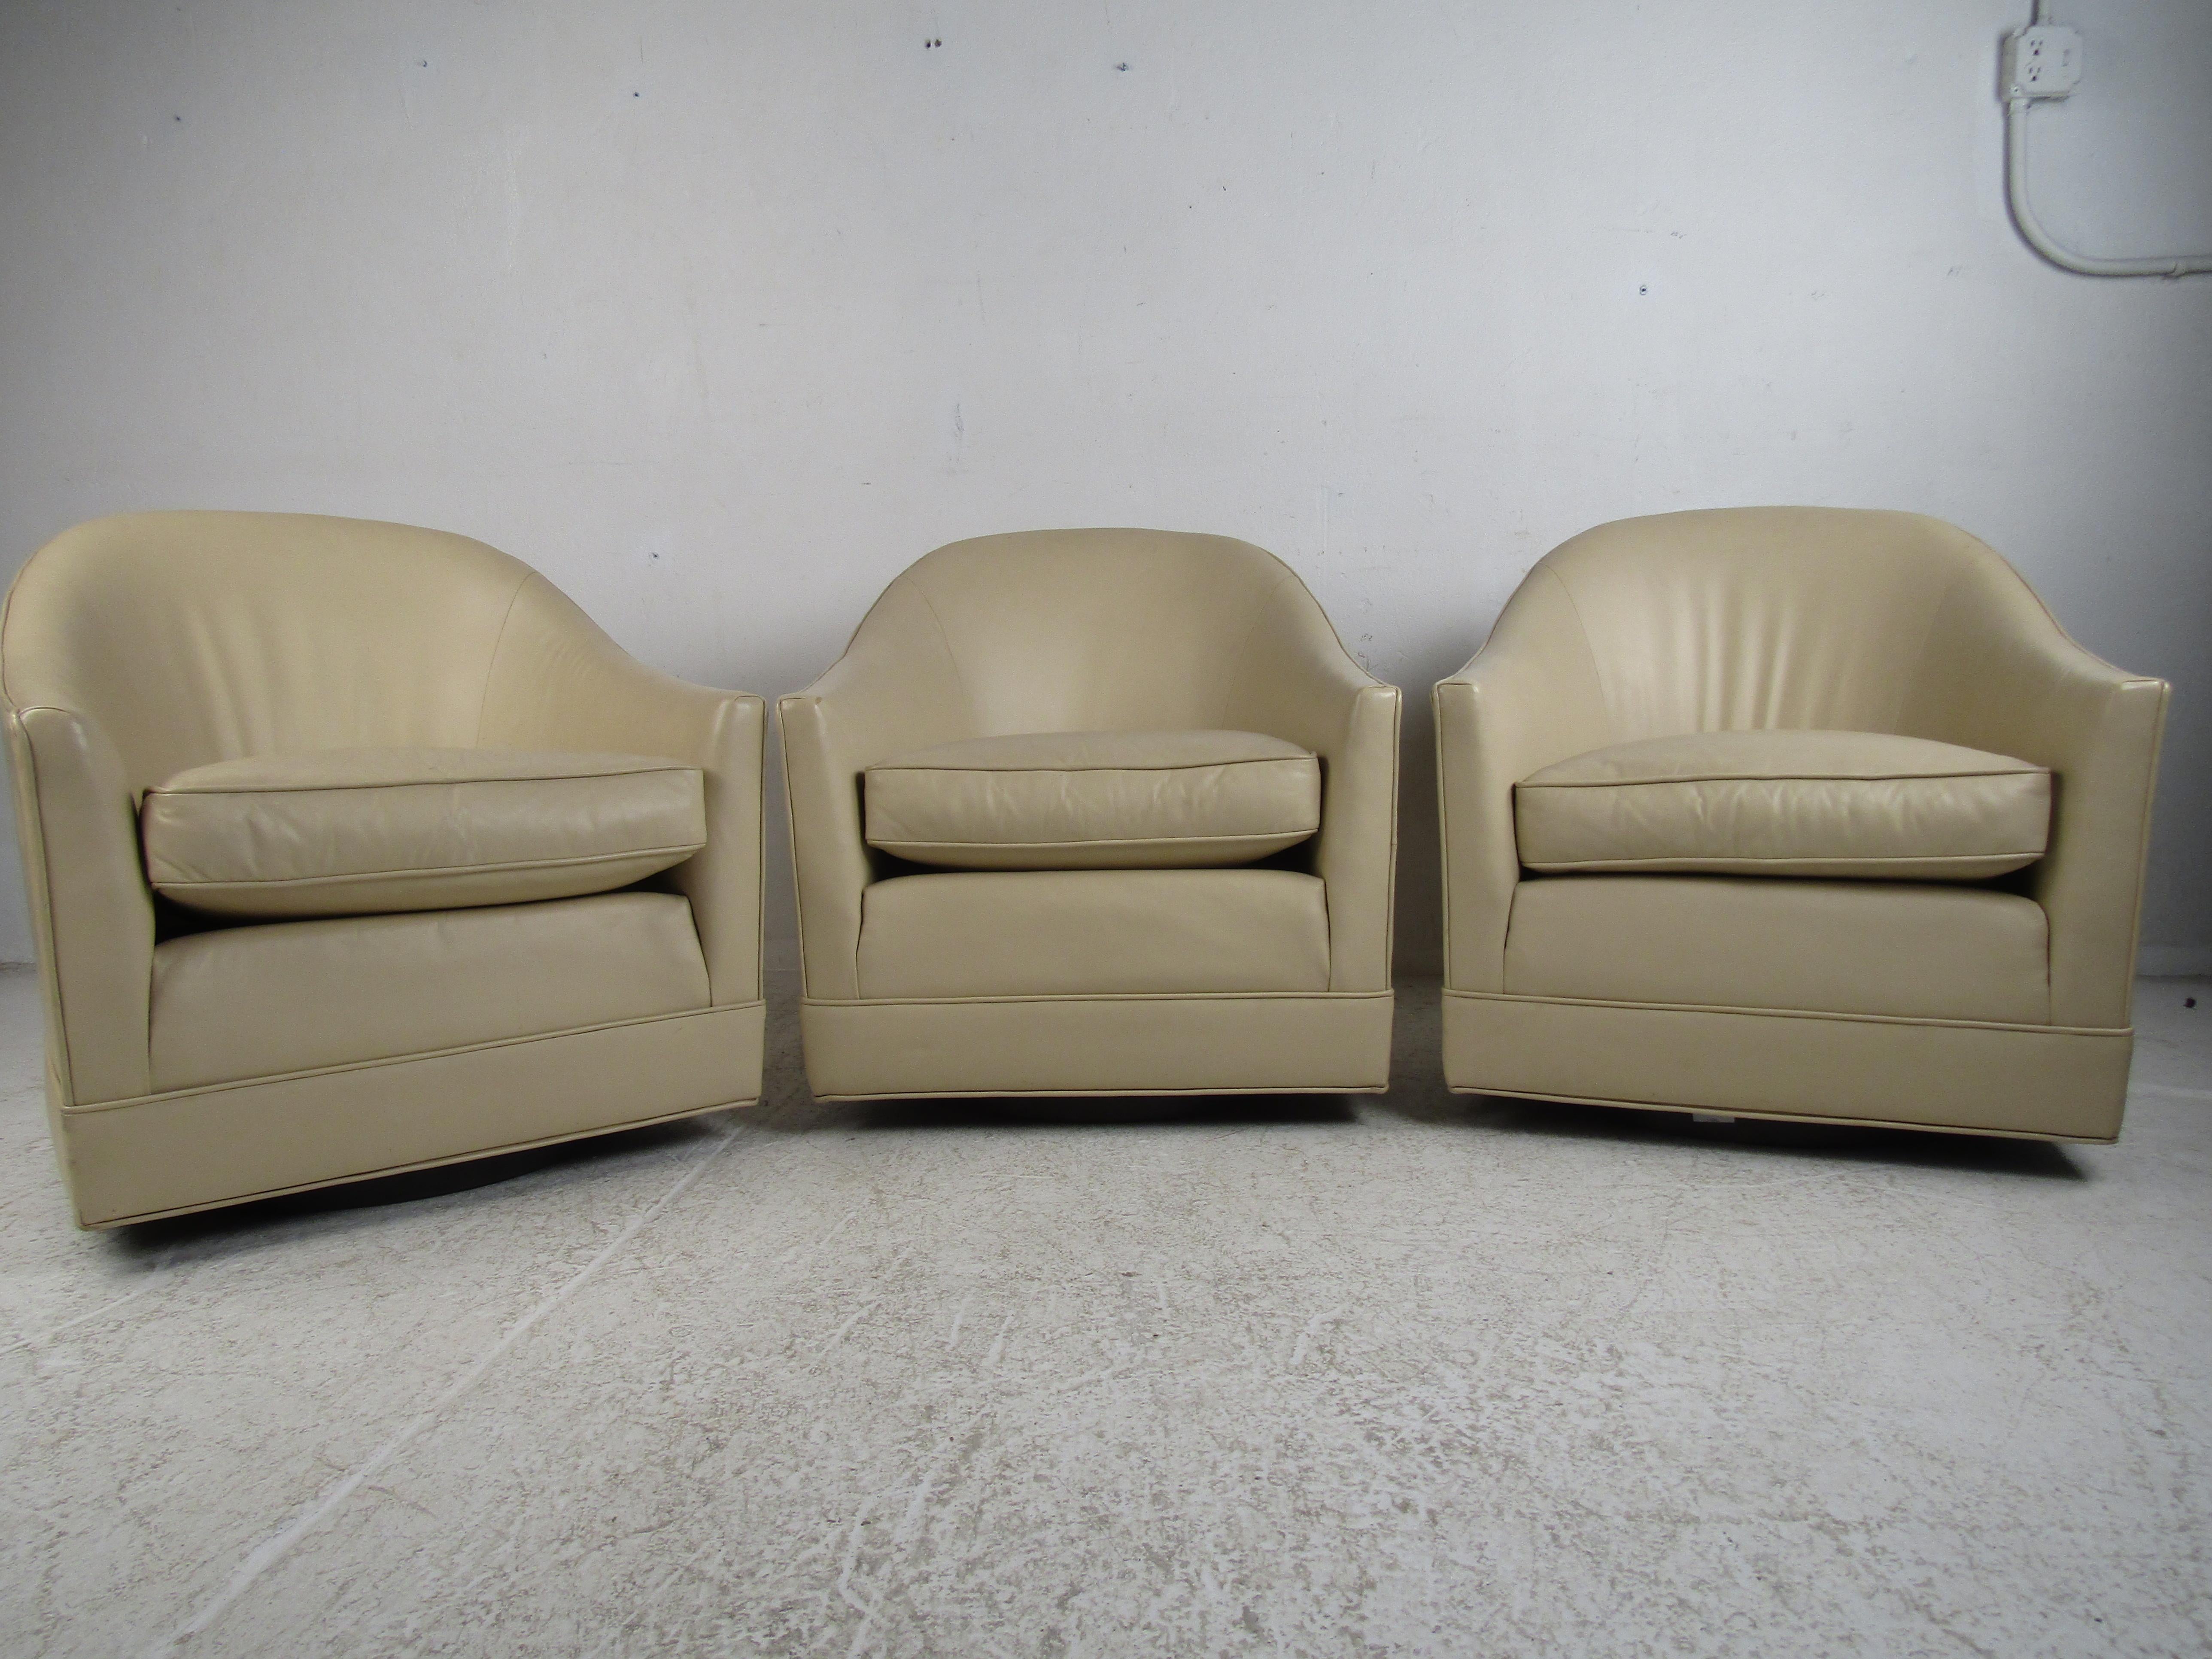 Late 20th Century Set of 3 Vintage Modern Harvey Probber Chairs For Sale